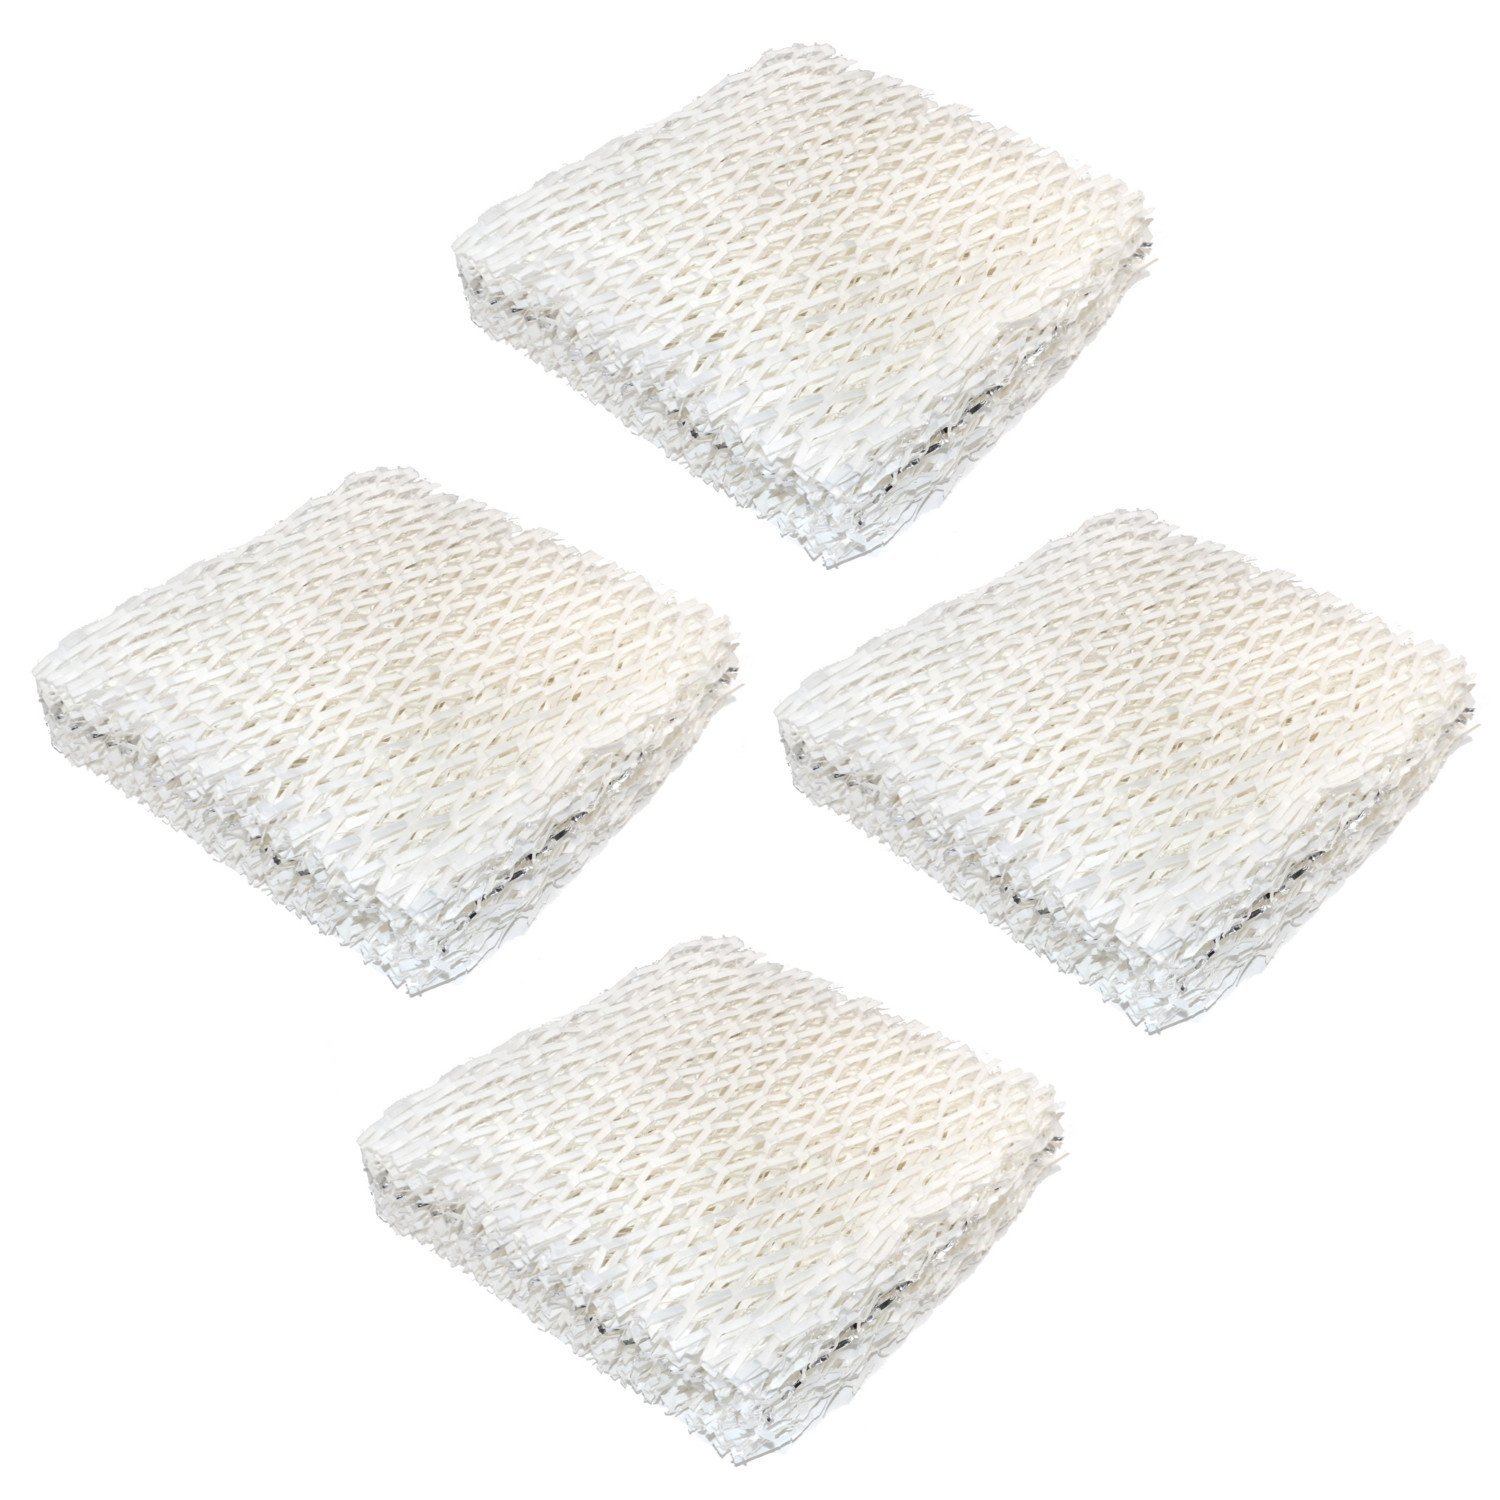 HQRP Humidifier Wick Filter for Sears Kenmore 14804 / D18-C / D18C / 32-14804 / 42-14804 Replacement, 4-pack